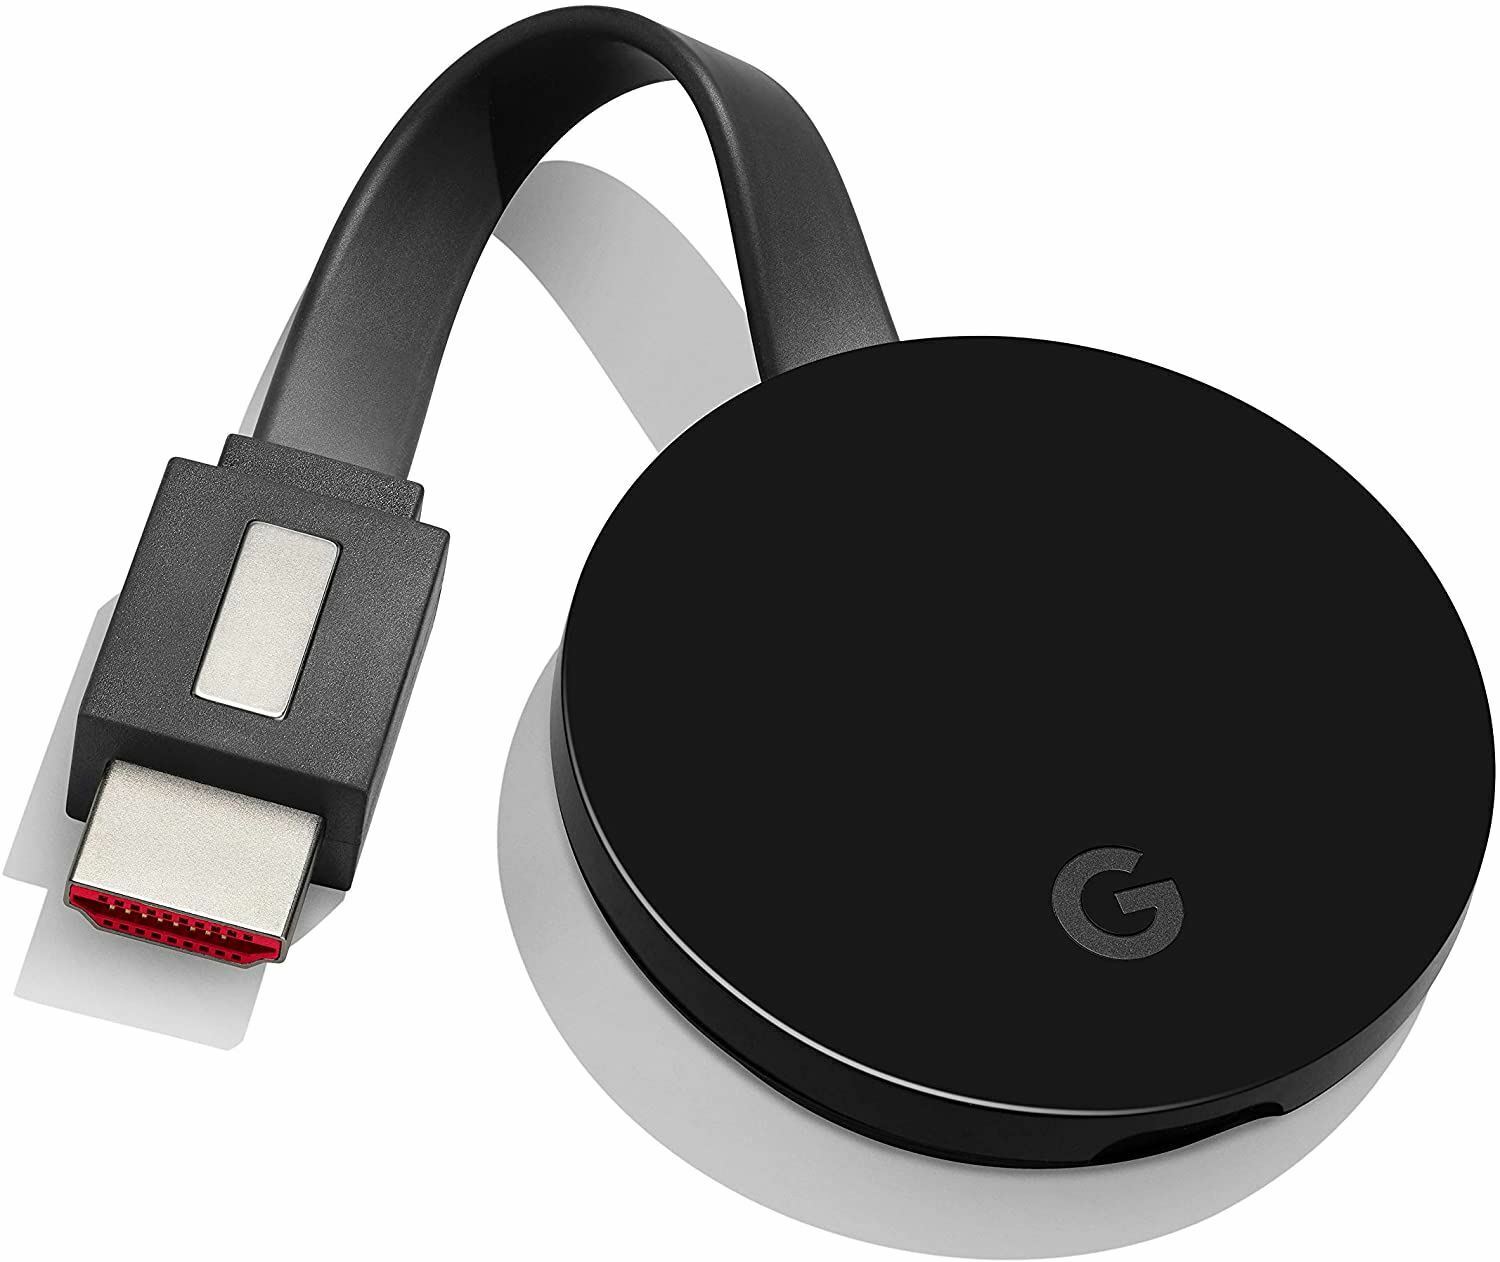 quick-and-easy-steps-to-reset-your-chromecast-dongle